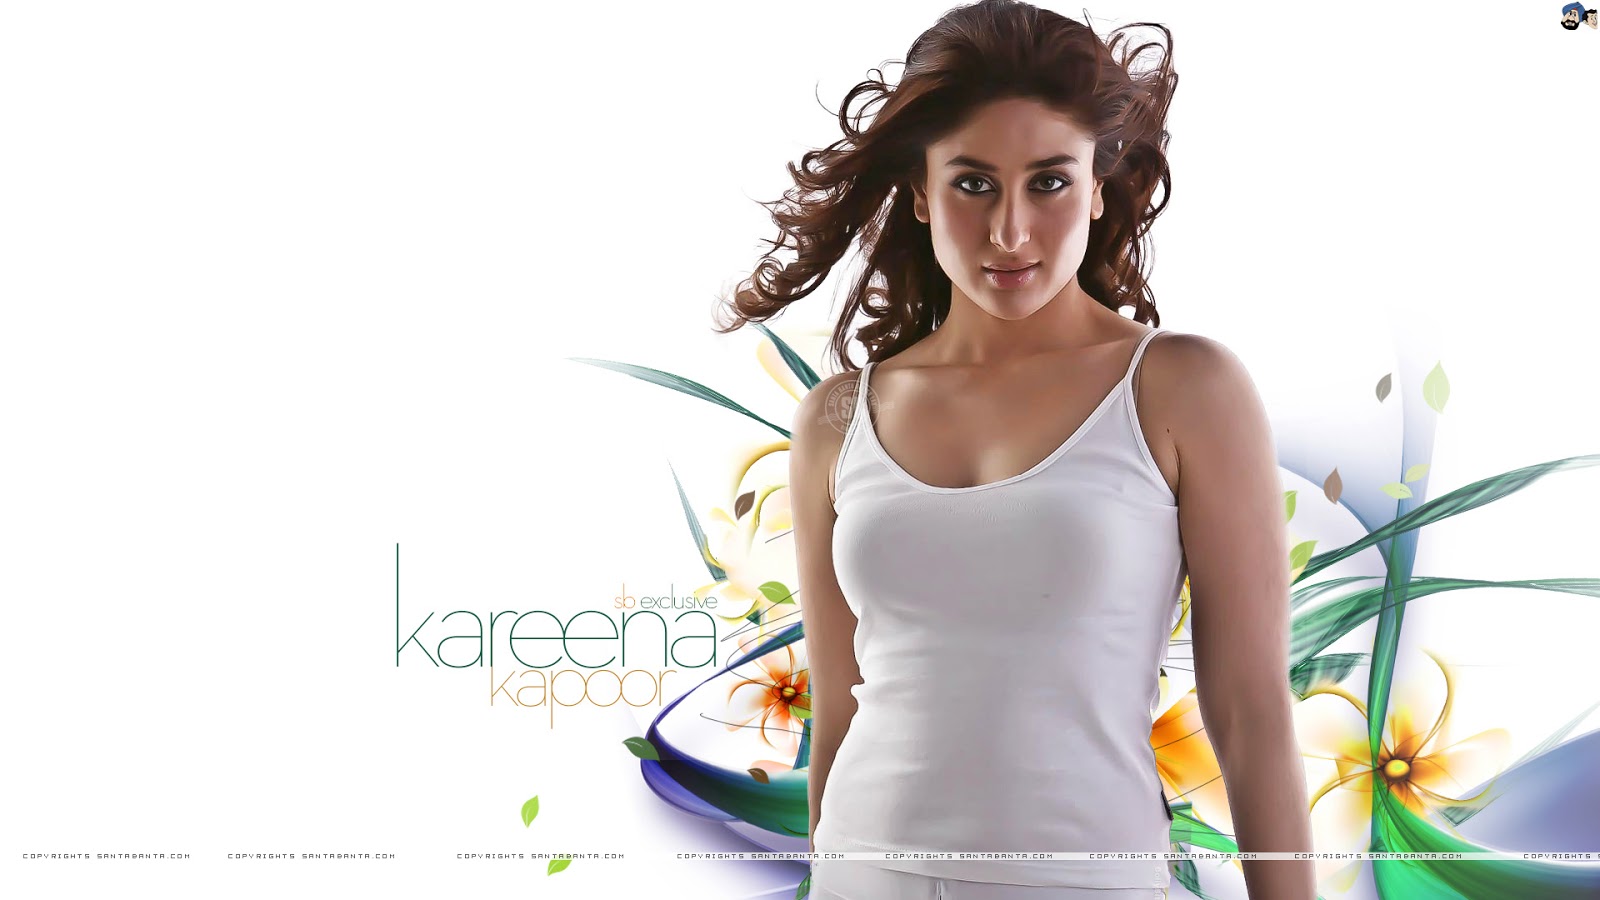 Bollywood Wallpapers: Kareena Kapoor In Dil Mera Song From The Movie ...